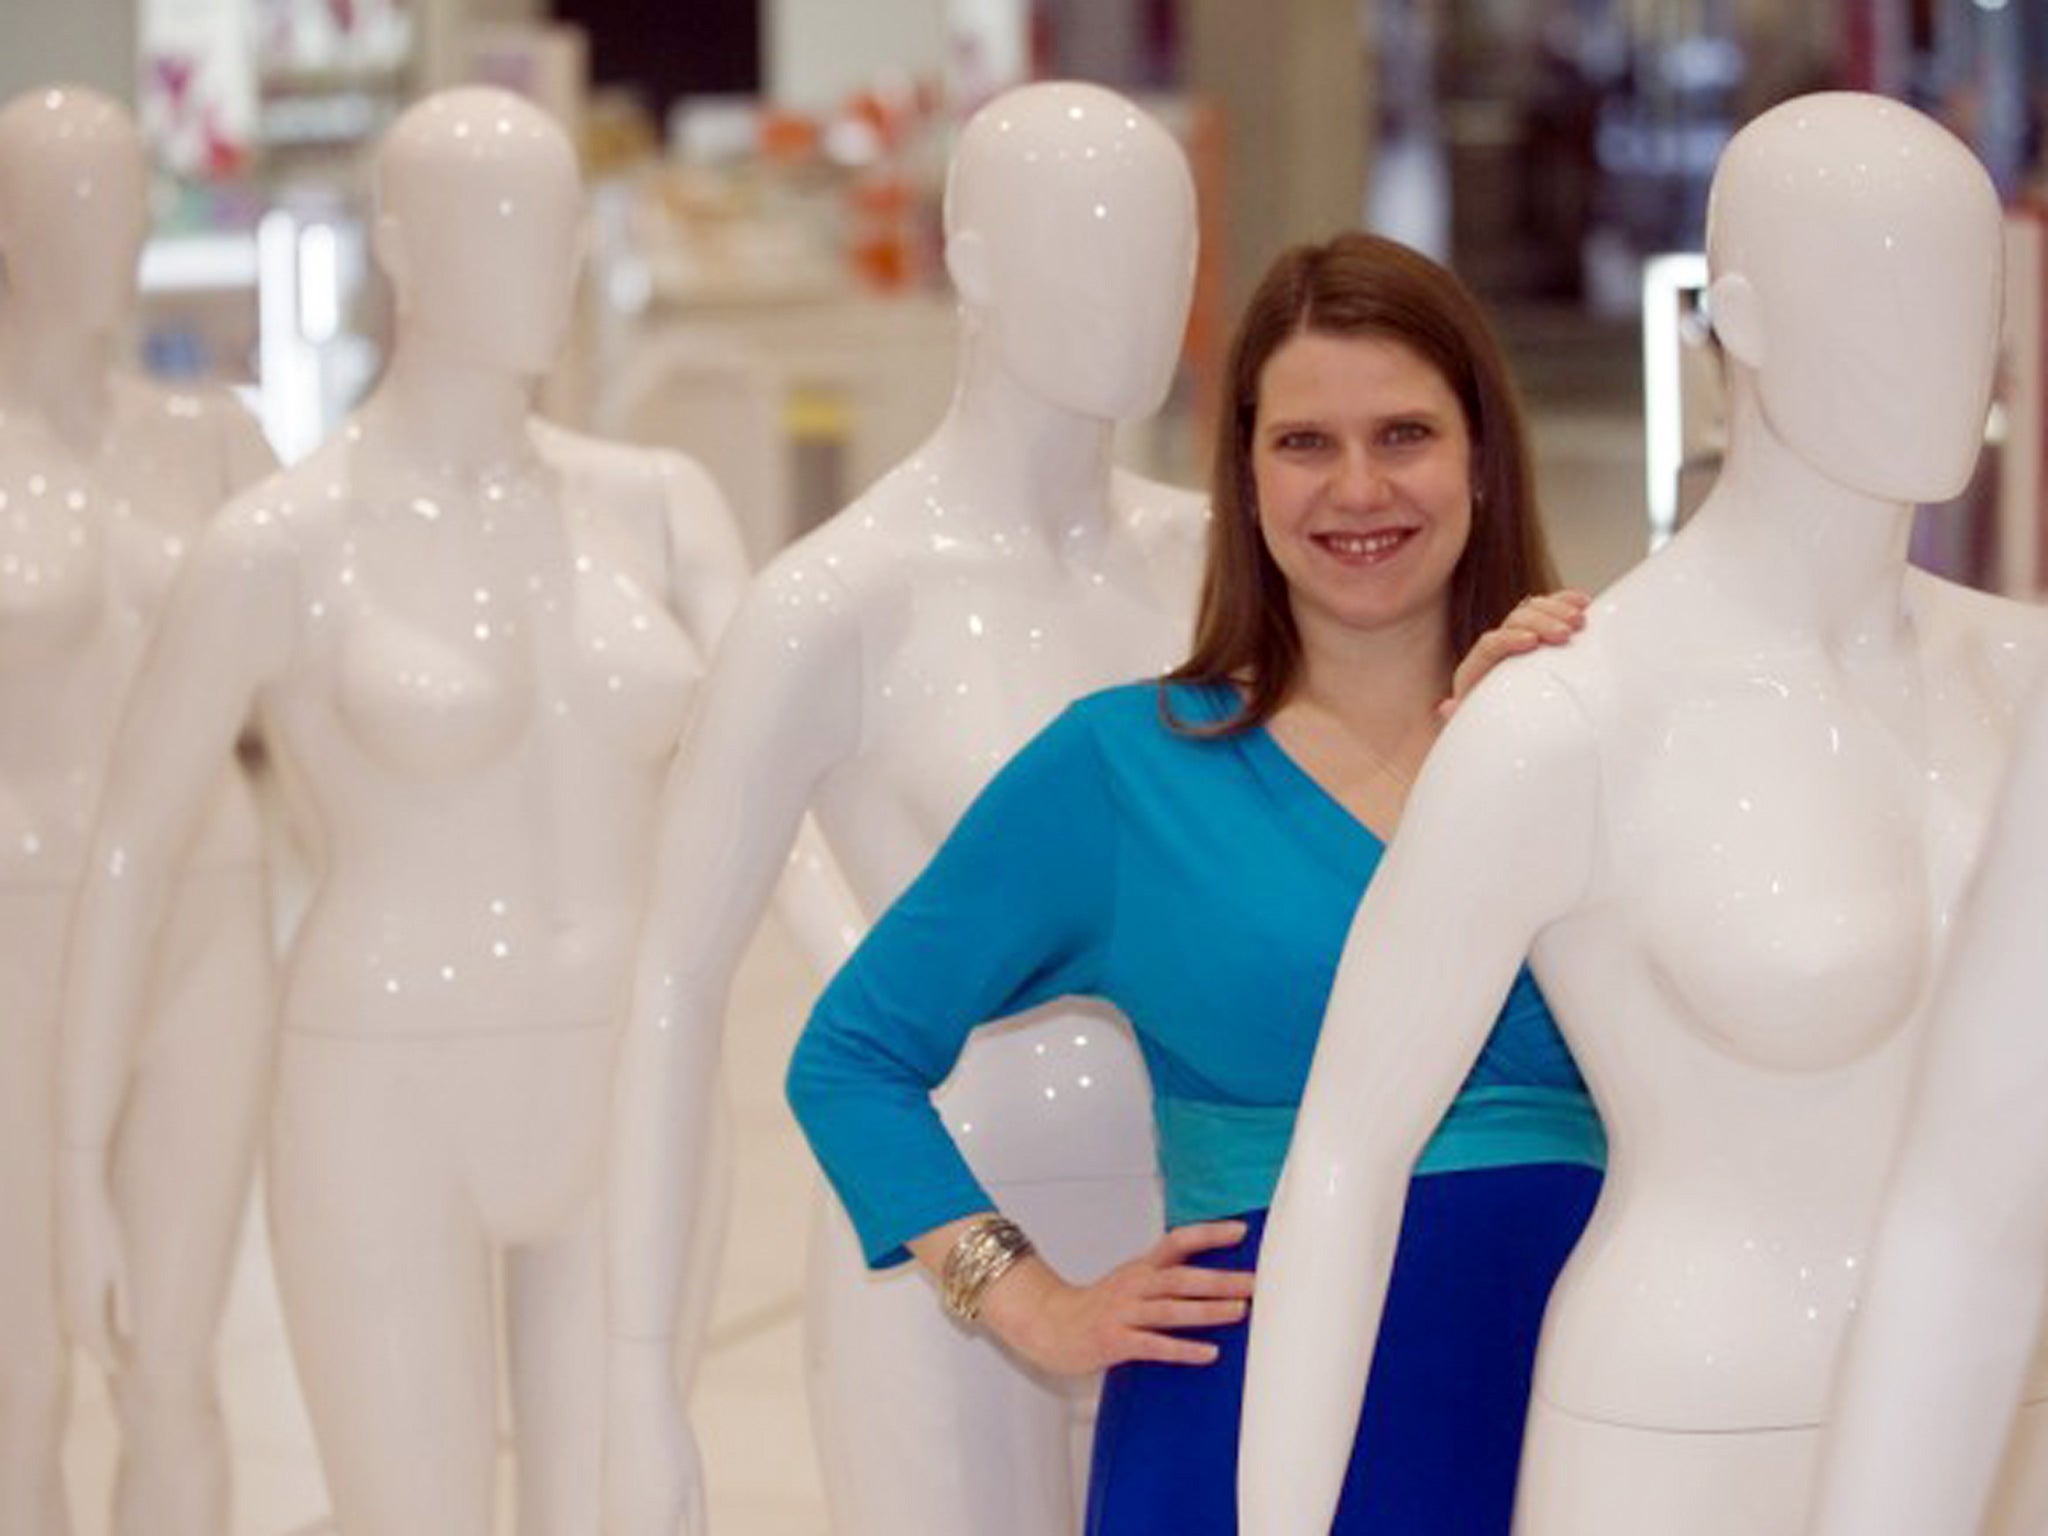 Jo Swinson at the Debenhams store in Oxford Street, London, at the launch of their size 16 mannequin range